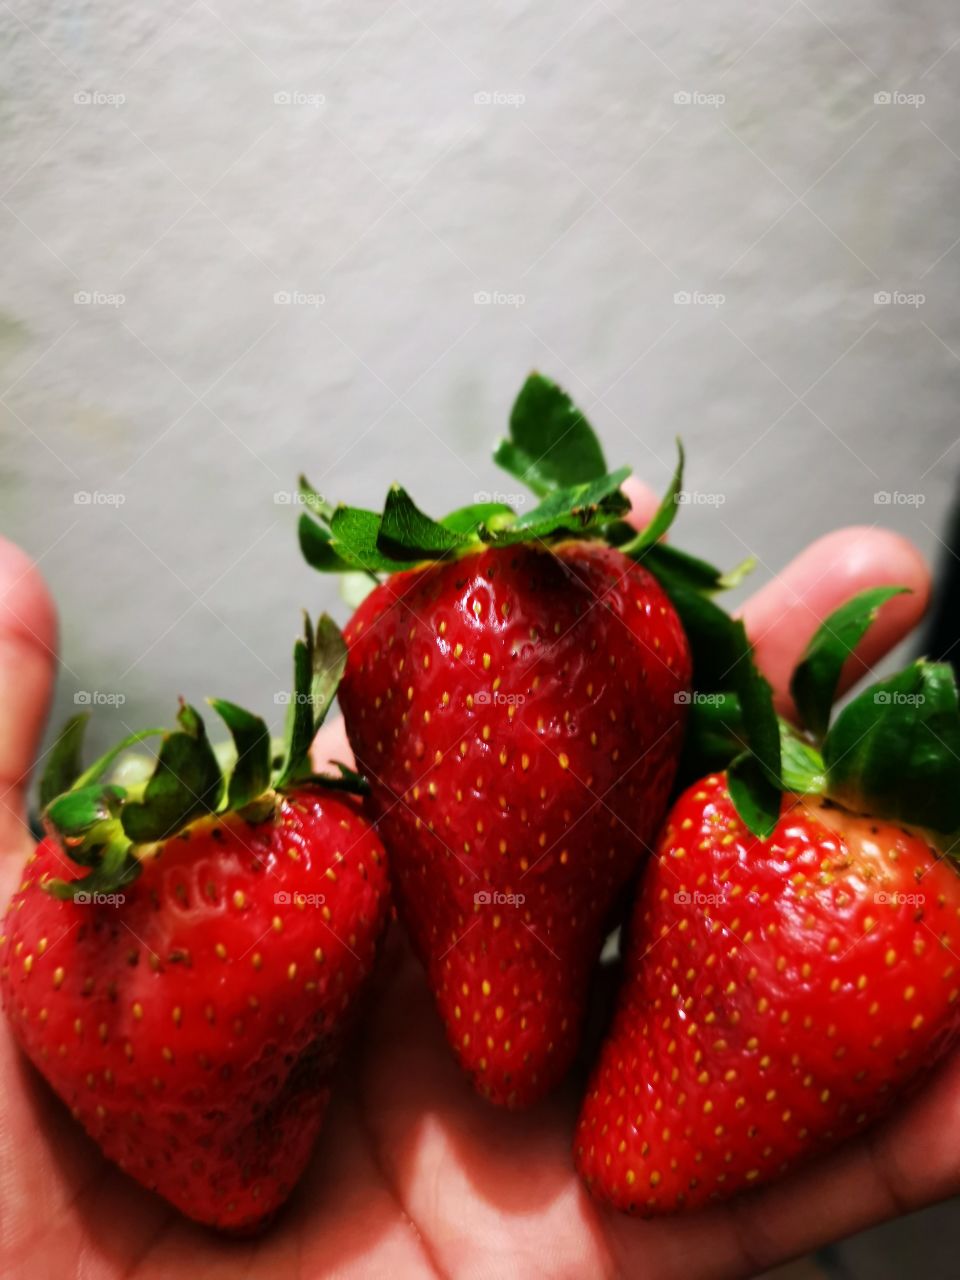 Strawberries, The Best Red Fruit Ever.